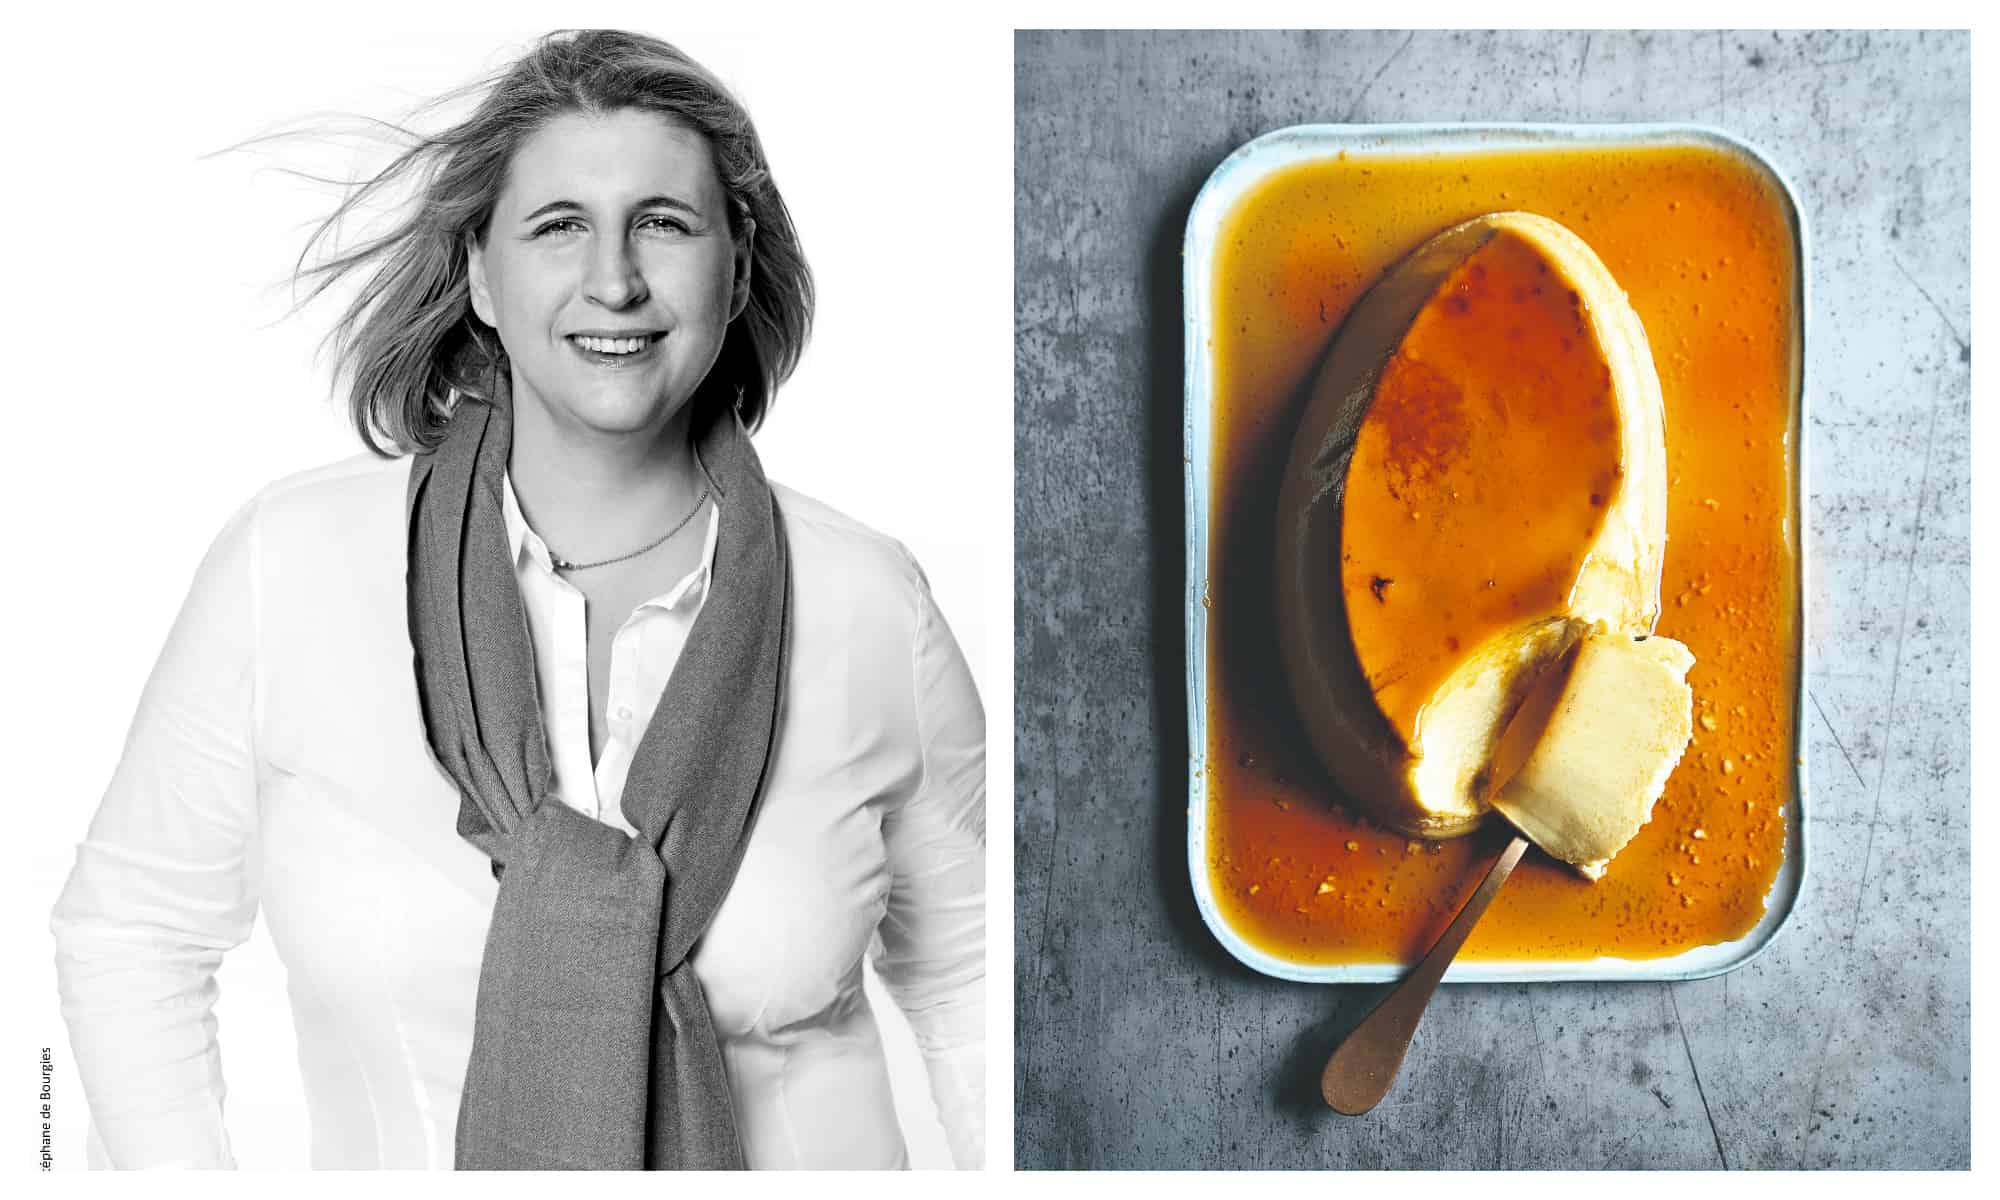 Left, a black and white portrait of 2-star chef Stéphanie Le Quellec. Right, a dish with unctuous crème caramel dessert covered in caramel with a spoon dug into into it.